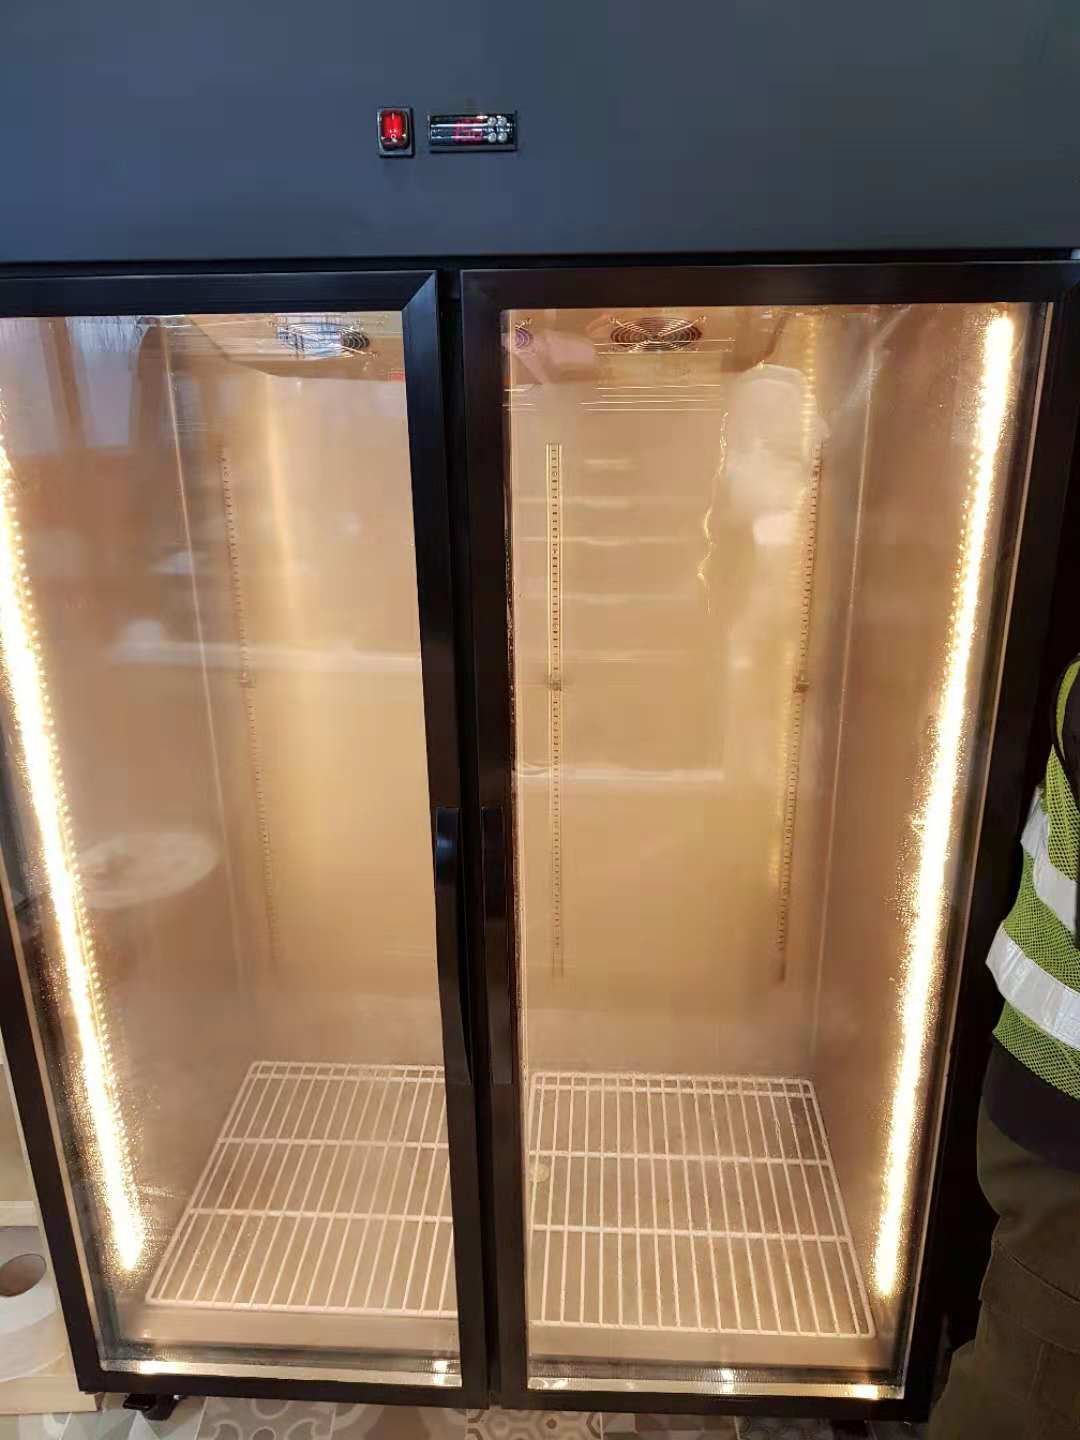 upright commercial refrigerator with glass door